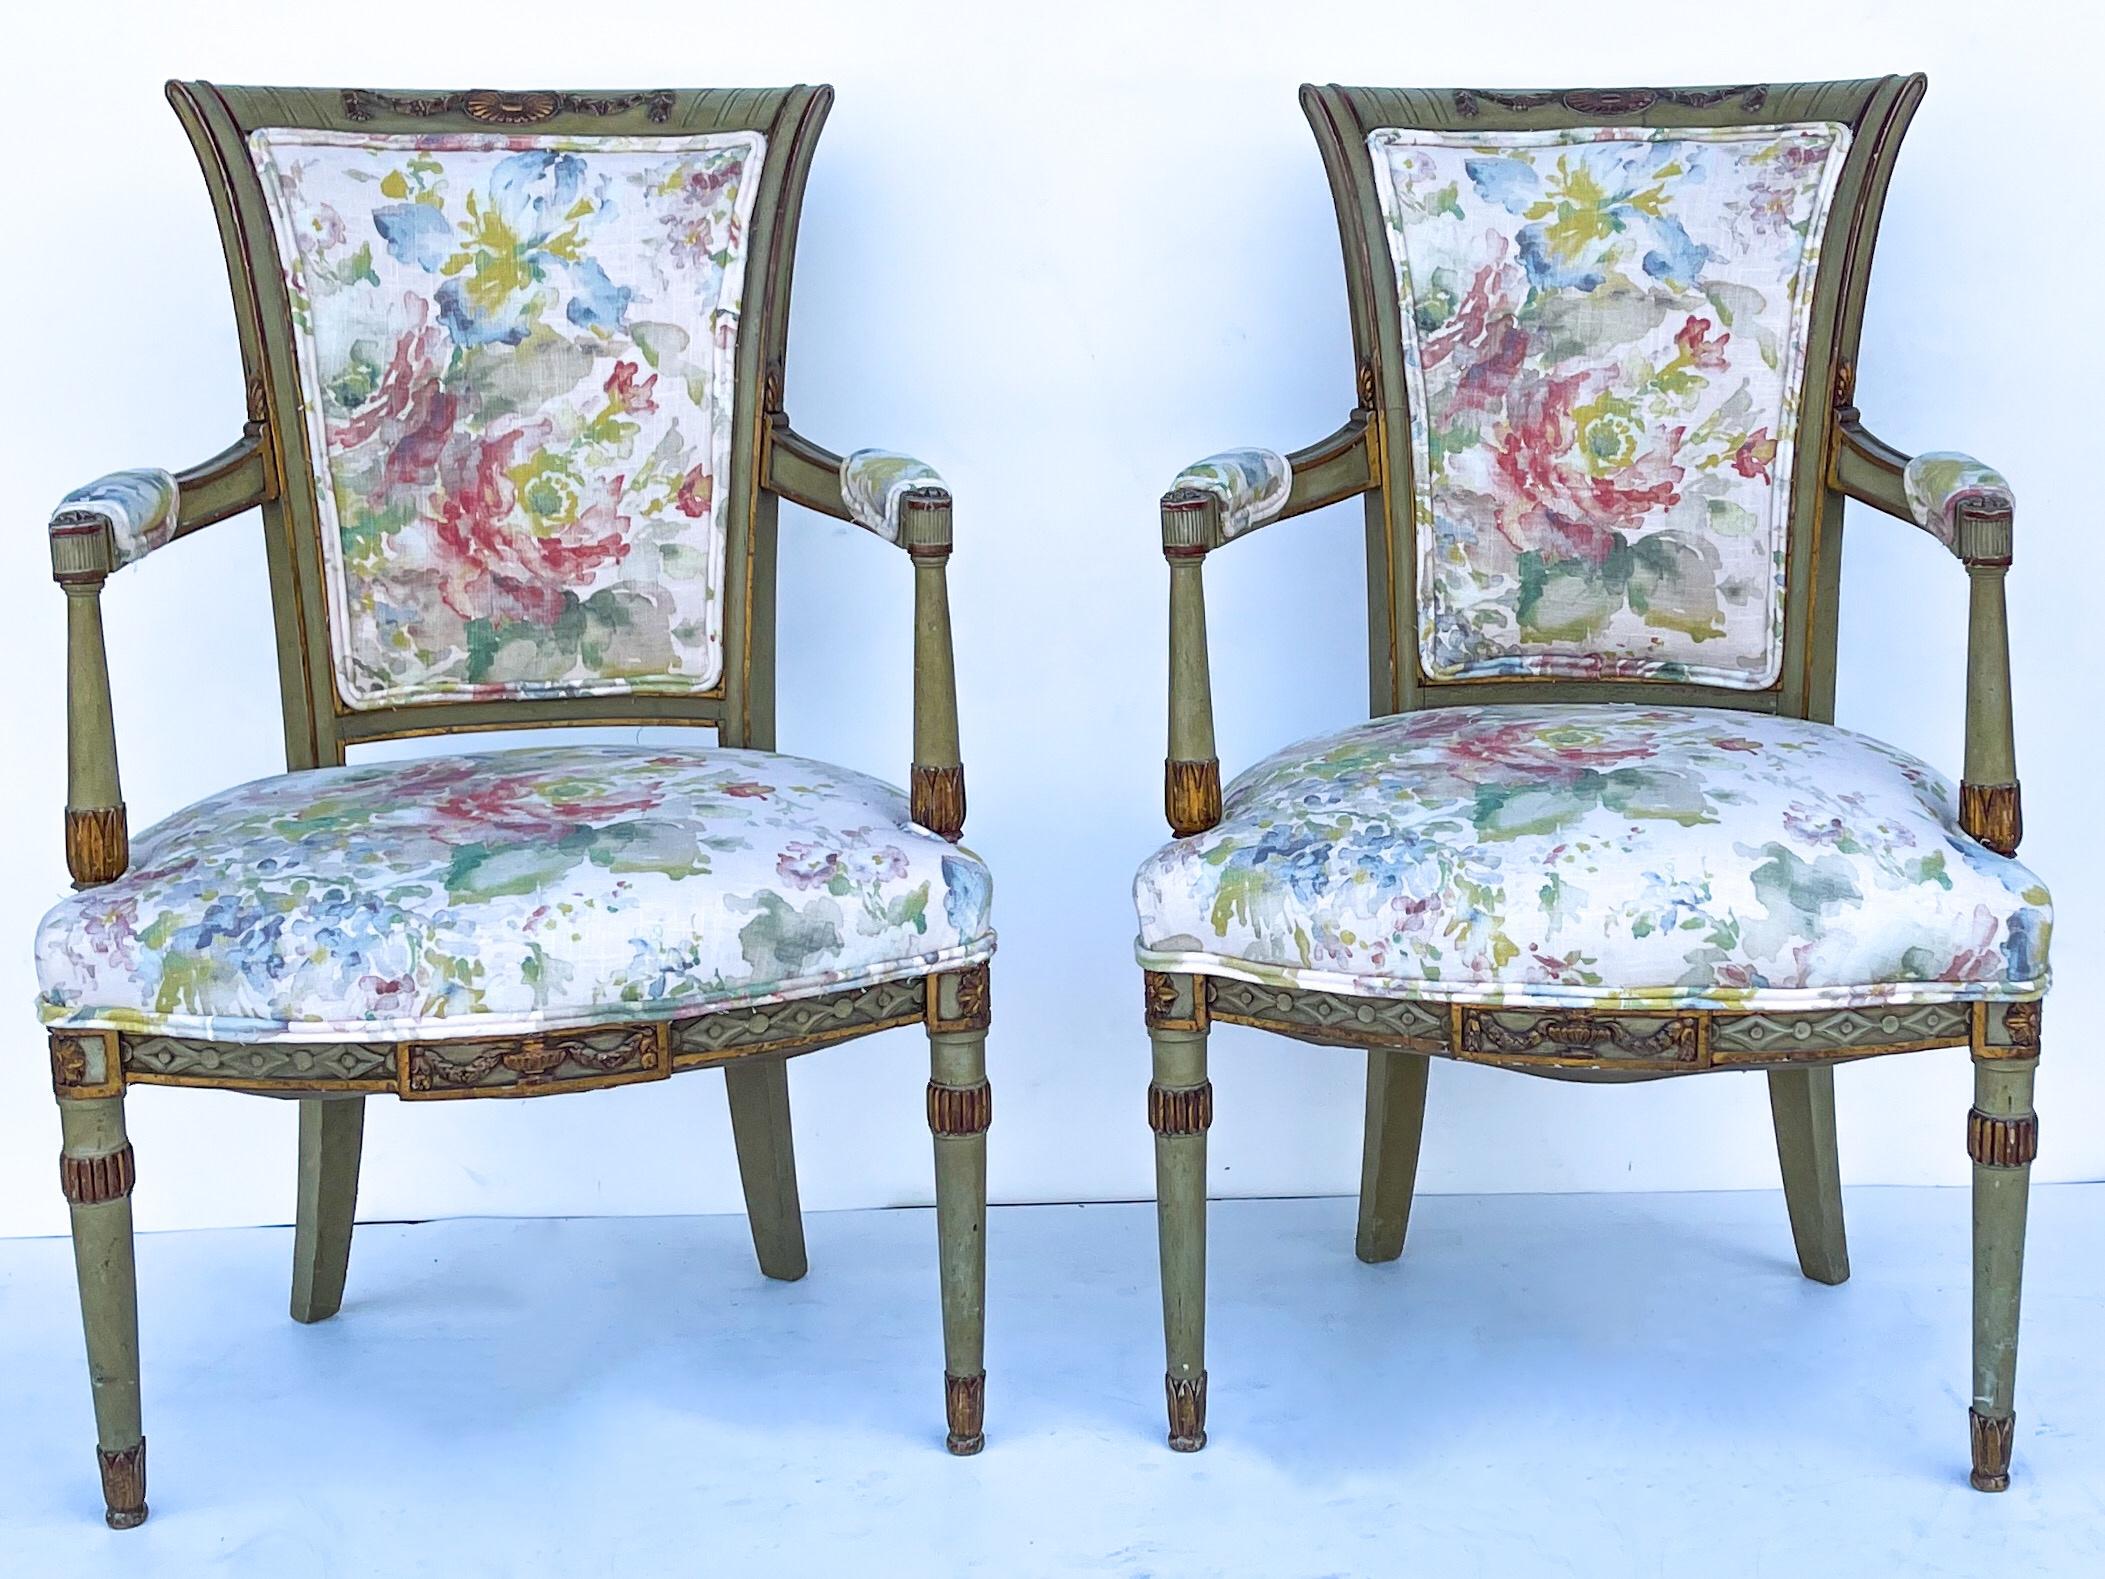 This is a pair of early 20th century carved French bergère chairs. The frames are sage green paint with almost deep russet painted details. The floral linen upholstery is recently done. They are in very good antique condition.